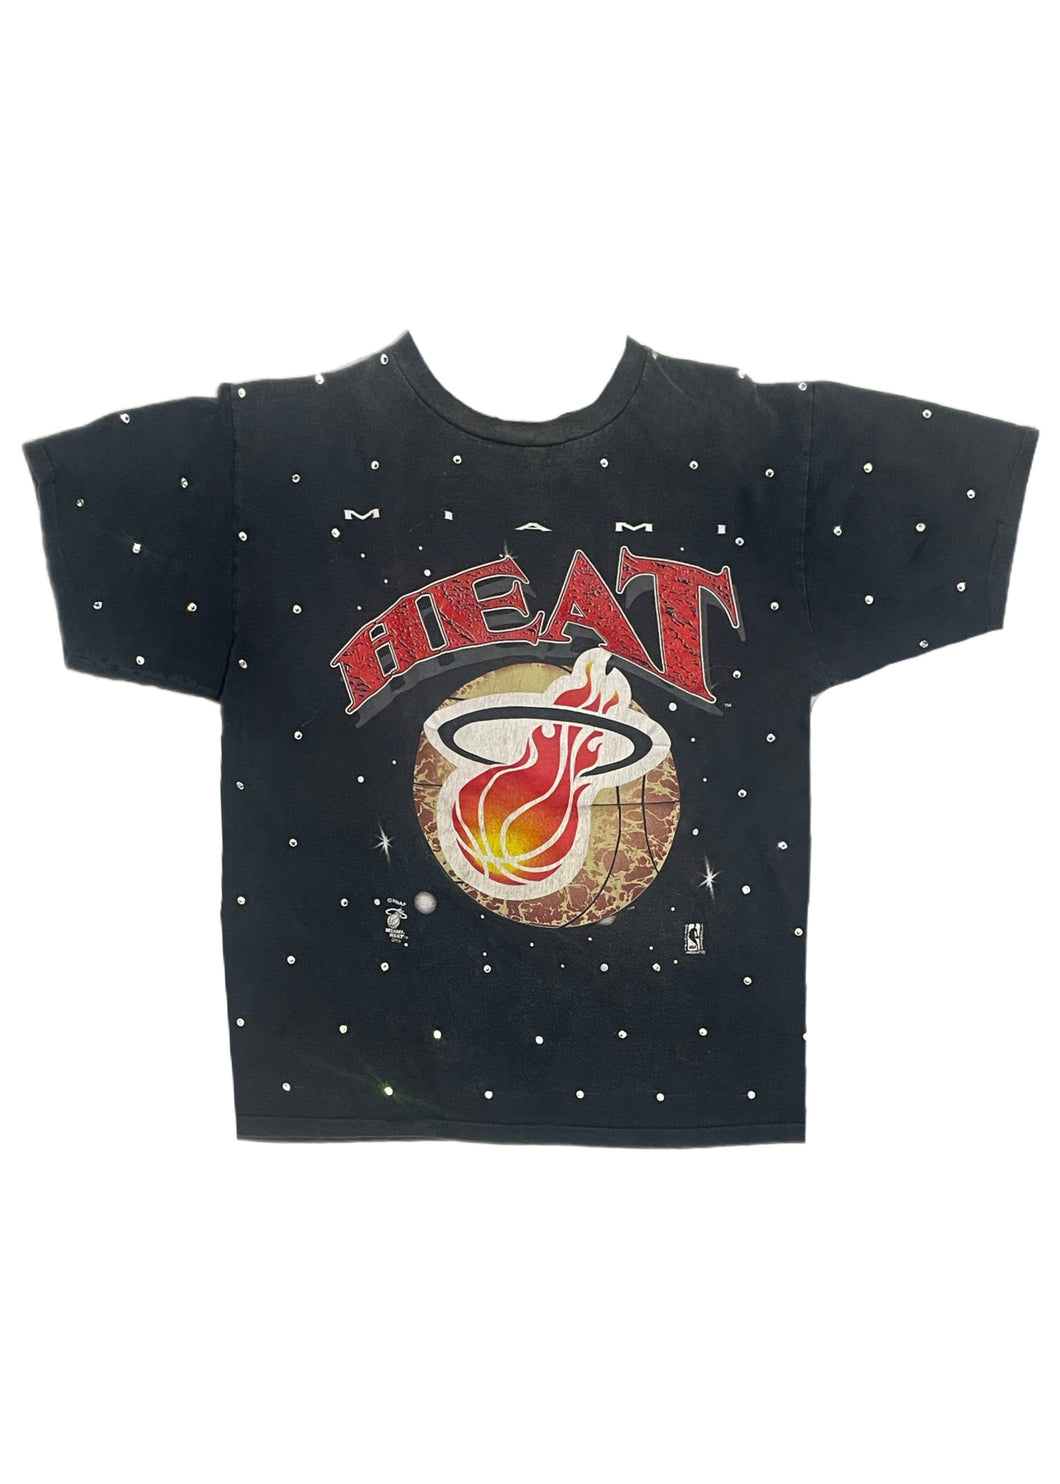 Miami Heat, NBA One of a KIND Vintage Tee with Overall Crystal Design